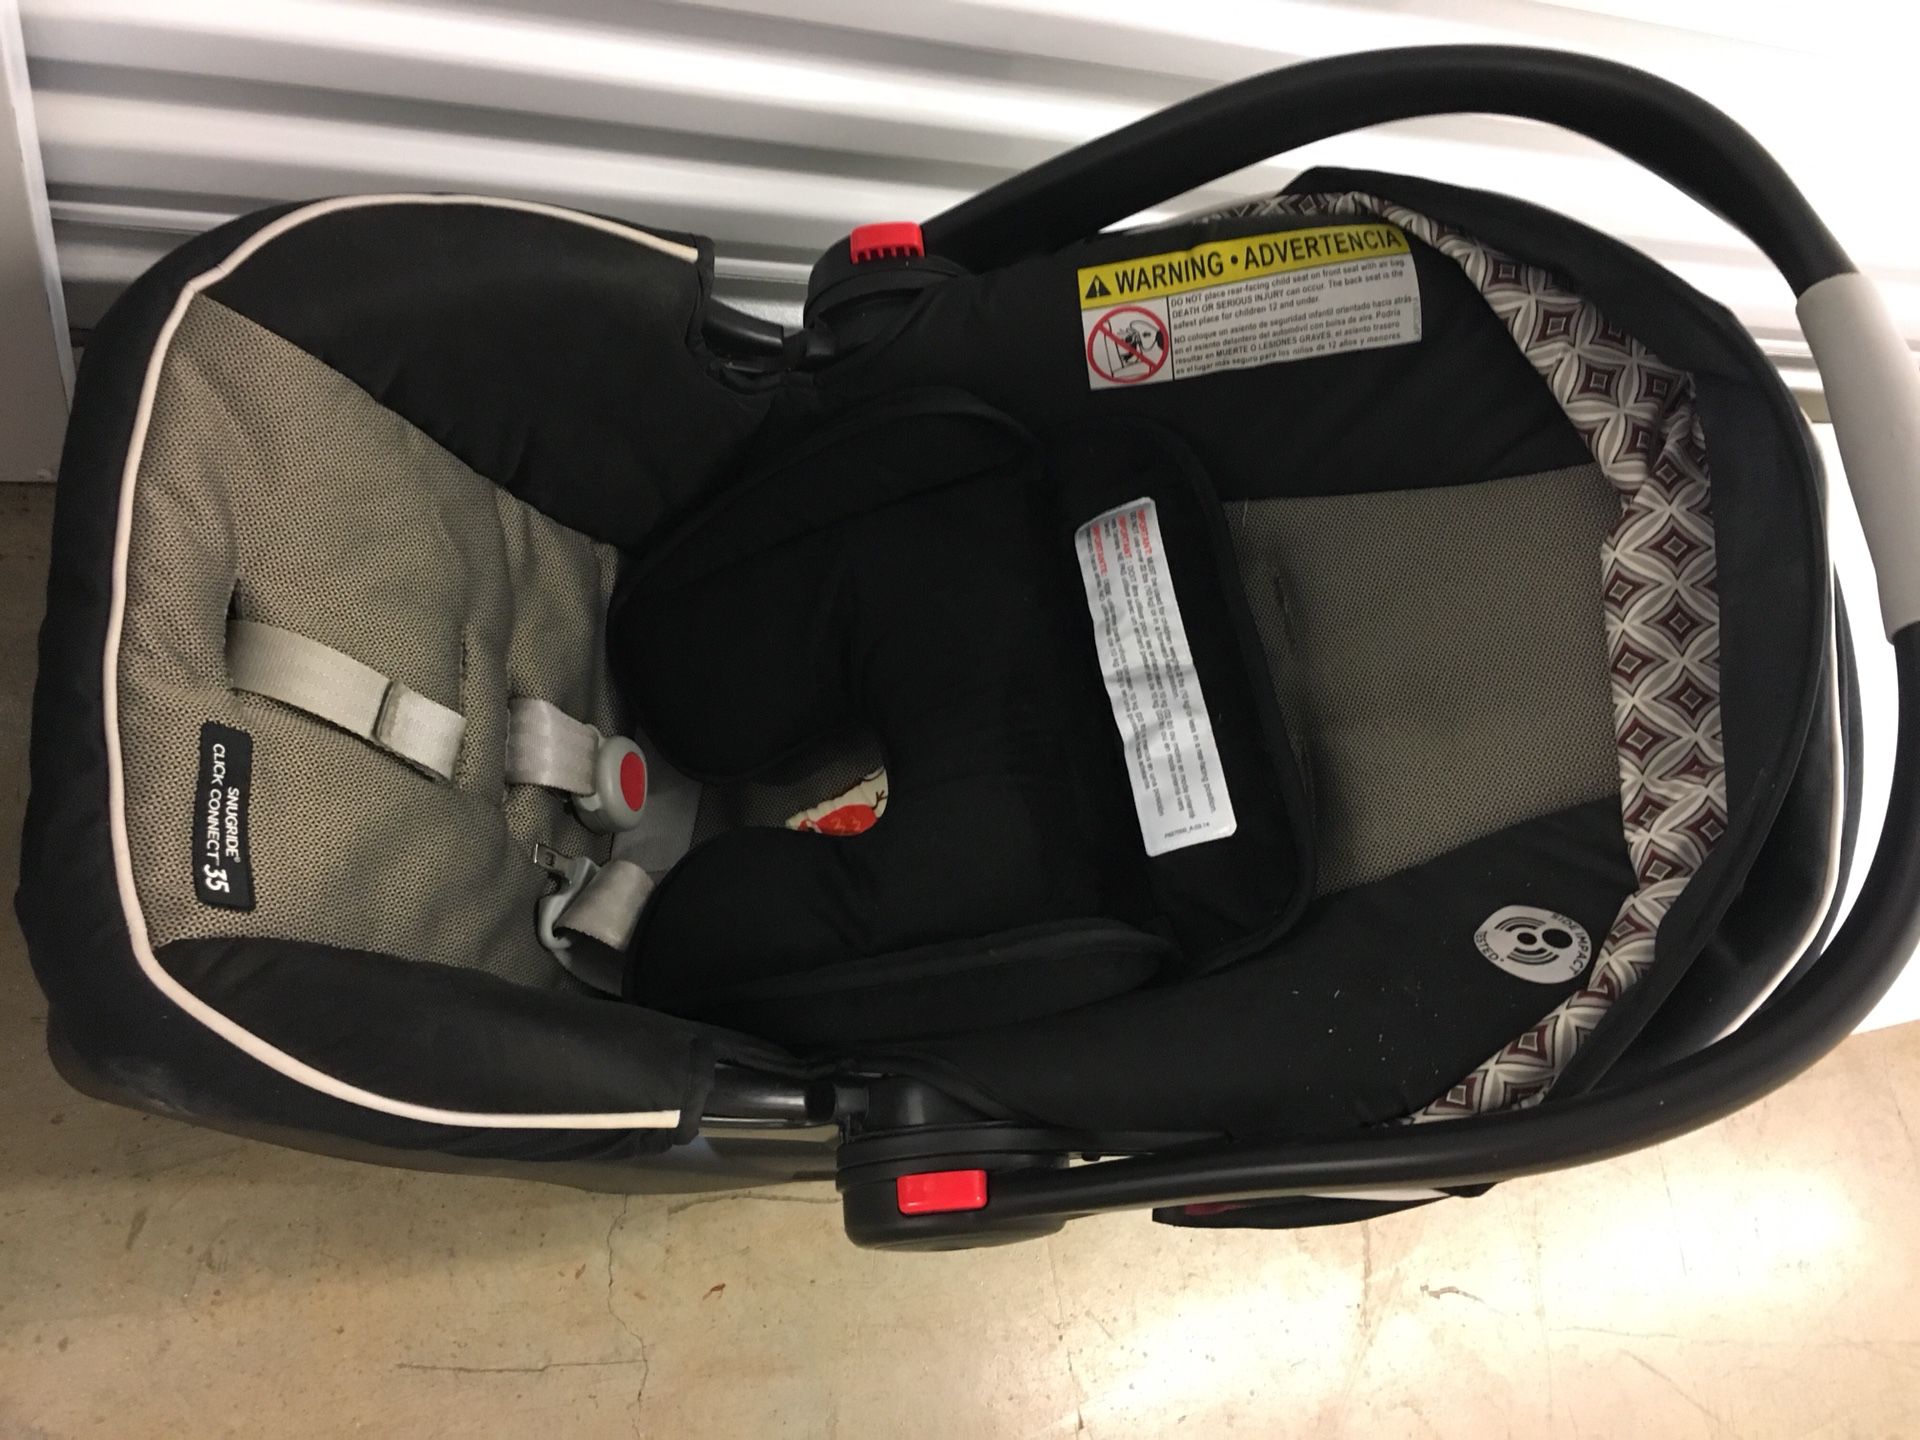 Graco click connect car seat with base